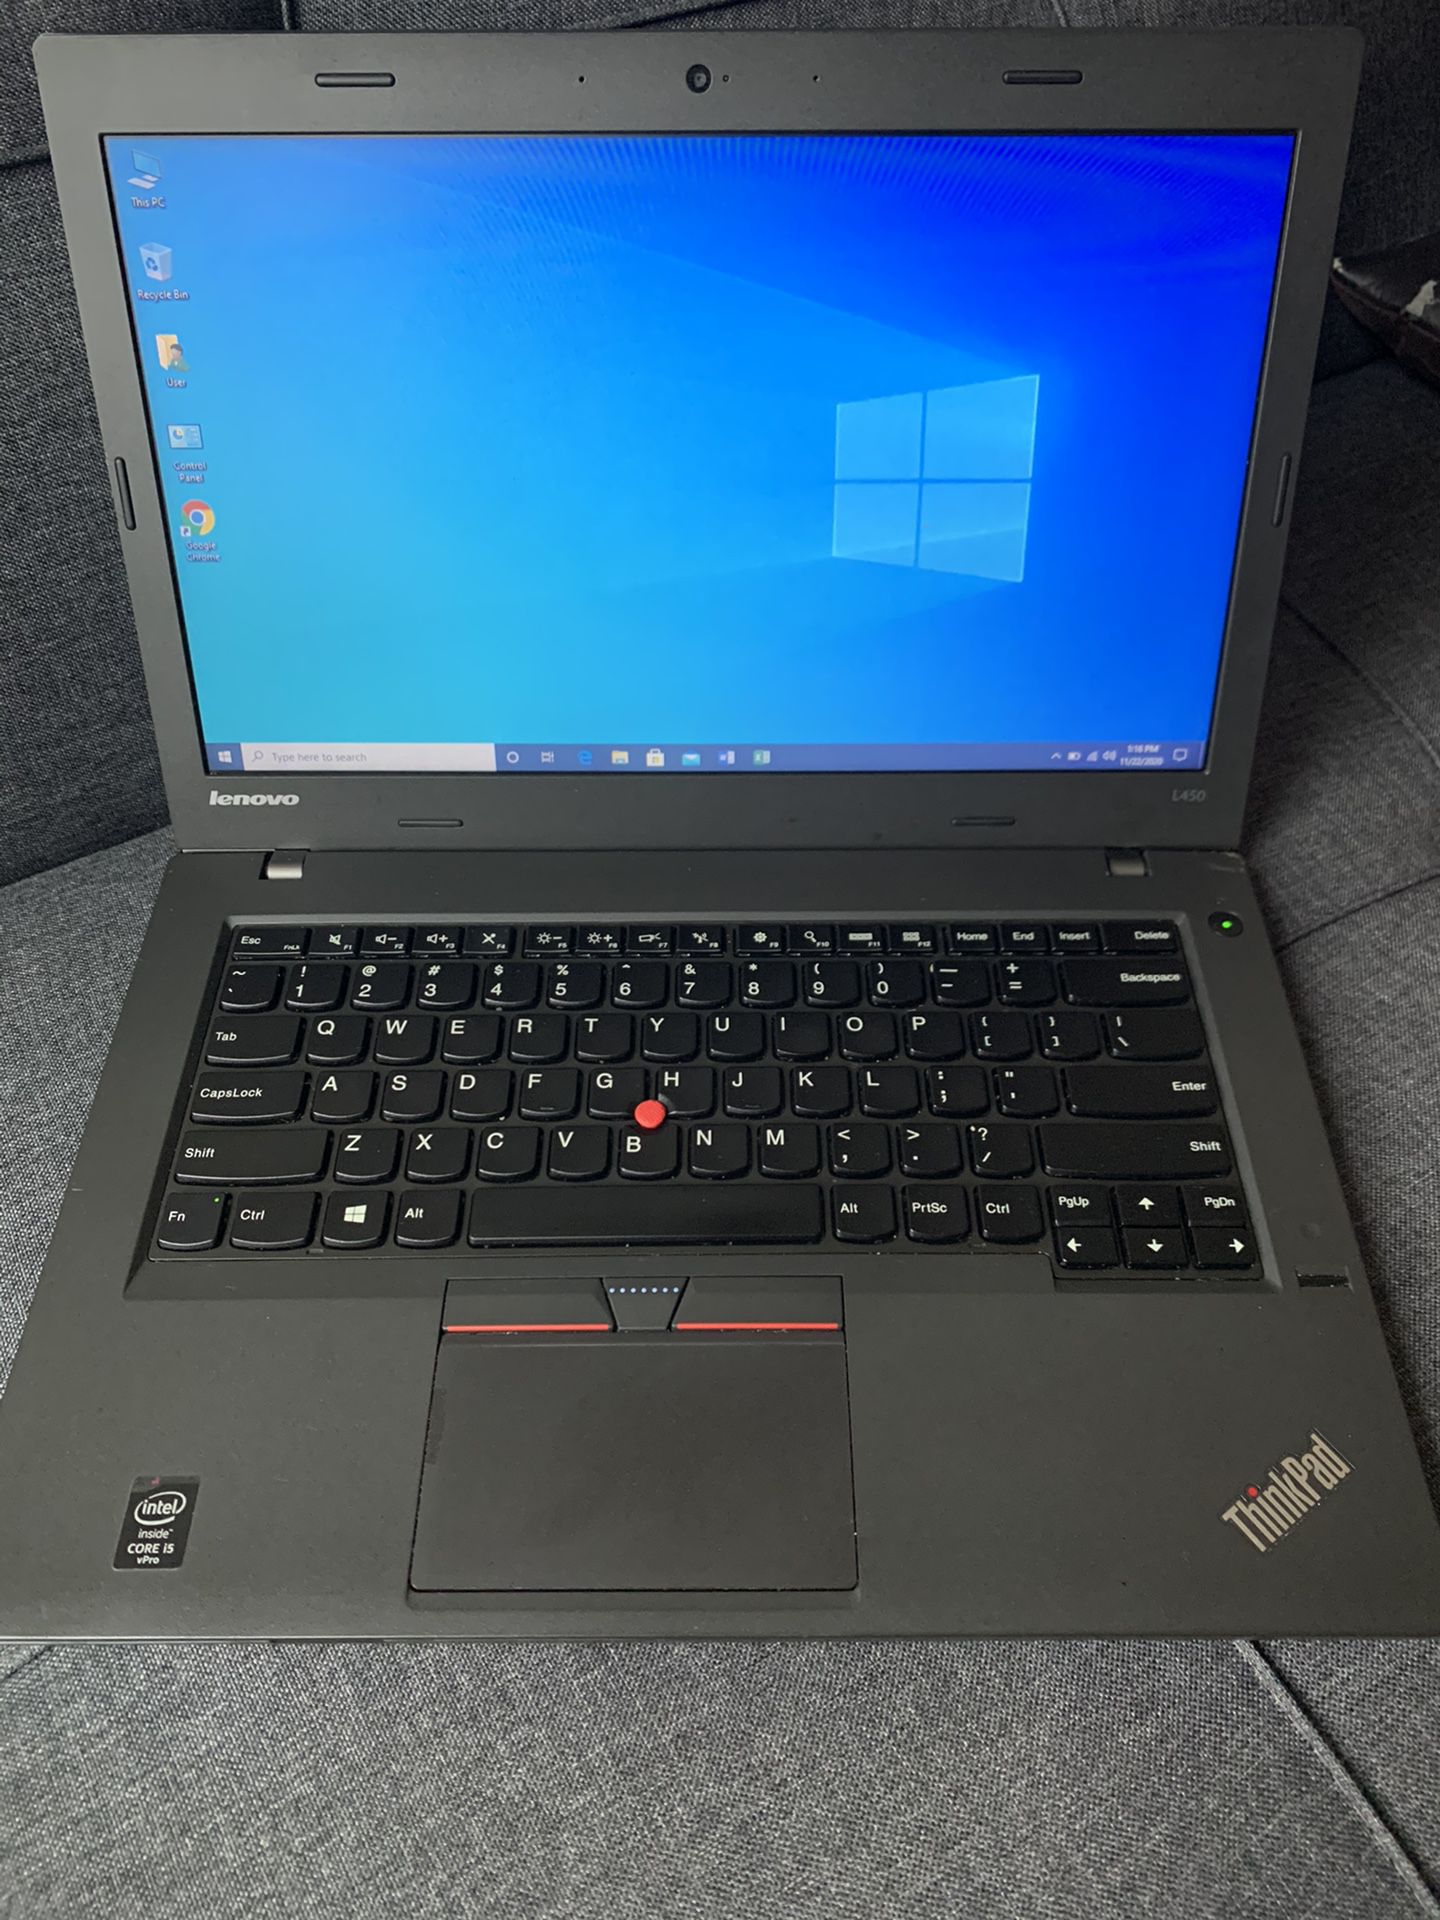 “LENOVO L450” powerful laptop Intel core (TM) i5-4600U CPU @ 2.10 GHz 2.69 GHz , 10 GB RAM,256 SSD with fully installed/ licensed Windows 10 and packa